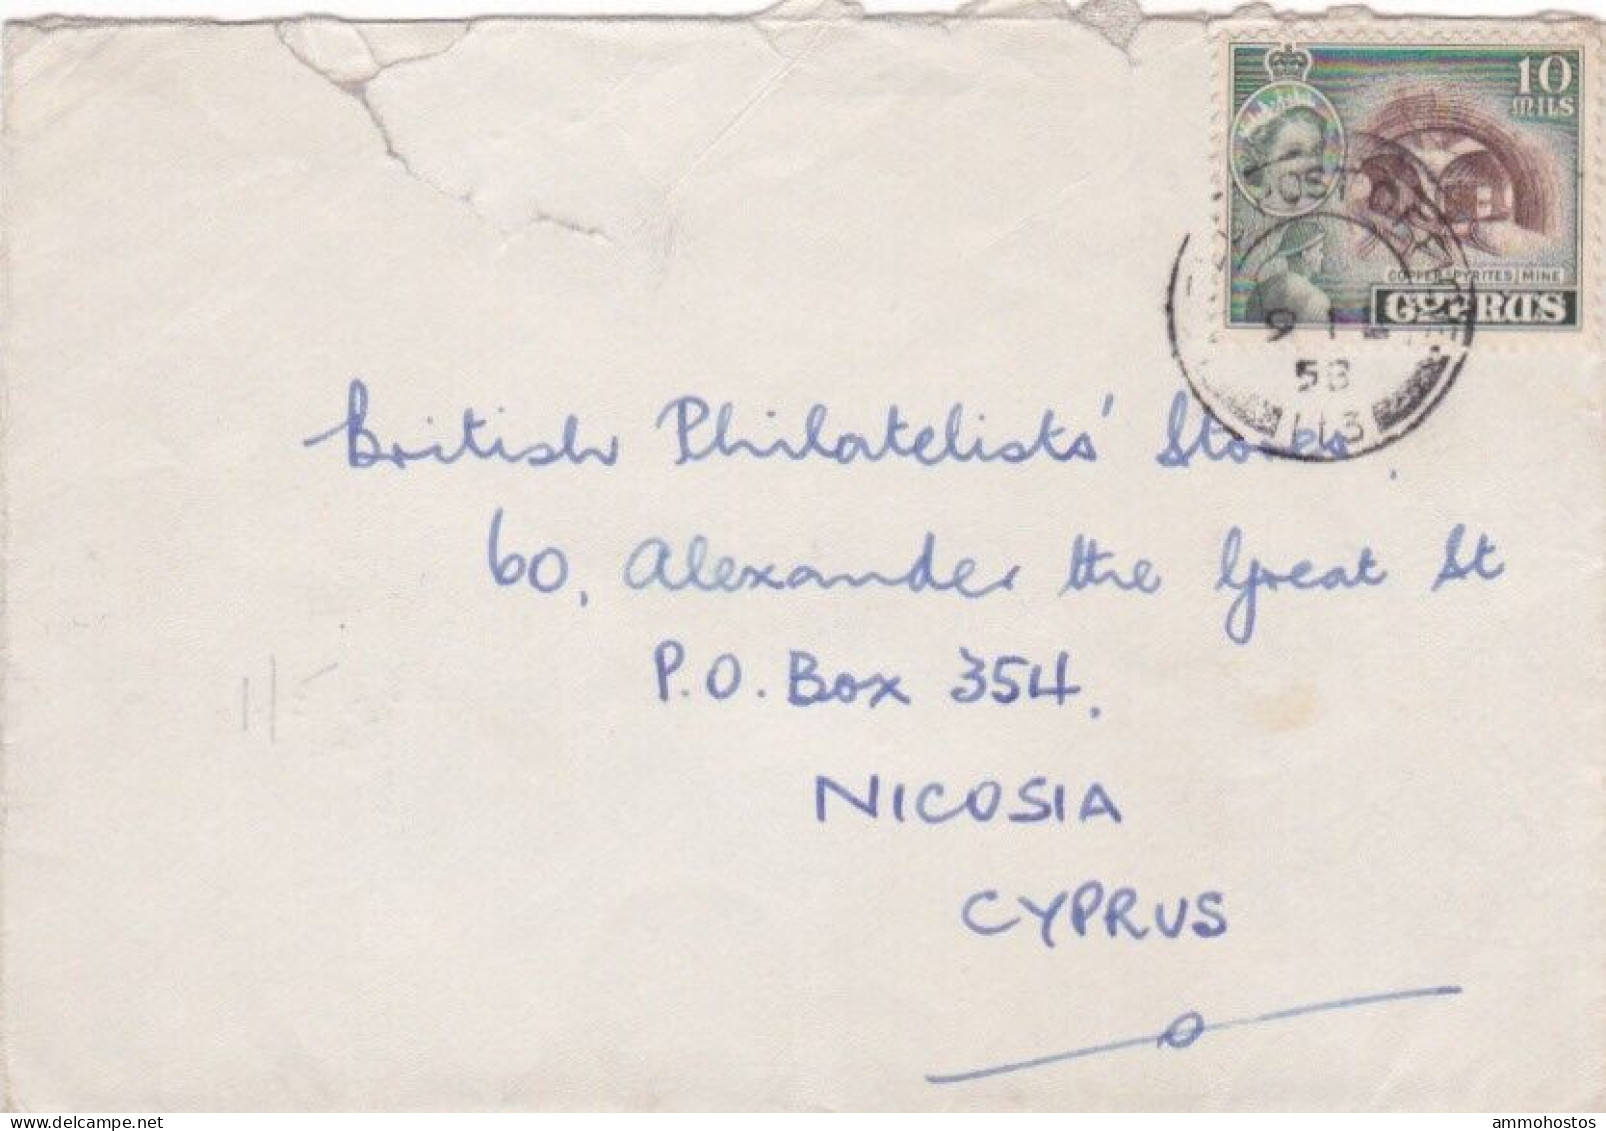 CYPRUS 1958 QEII COVER FIELD POST OFFICE FPO 113 TO NICOSIA 10 MILS LOCAL RATE - Cyprus (...-1960)